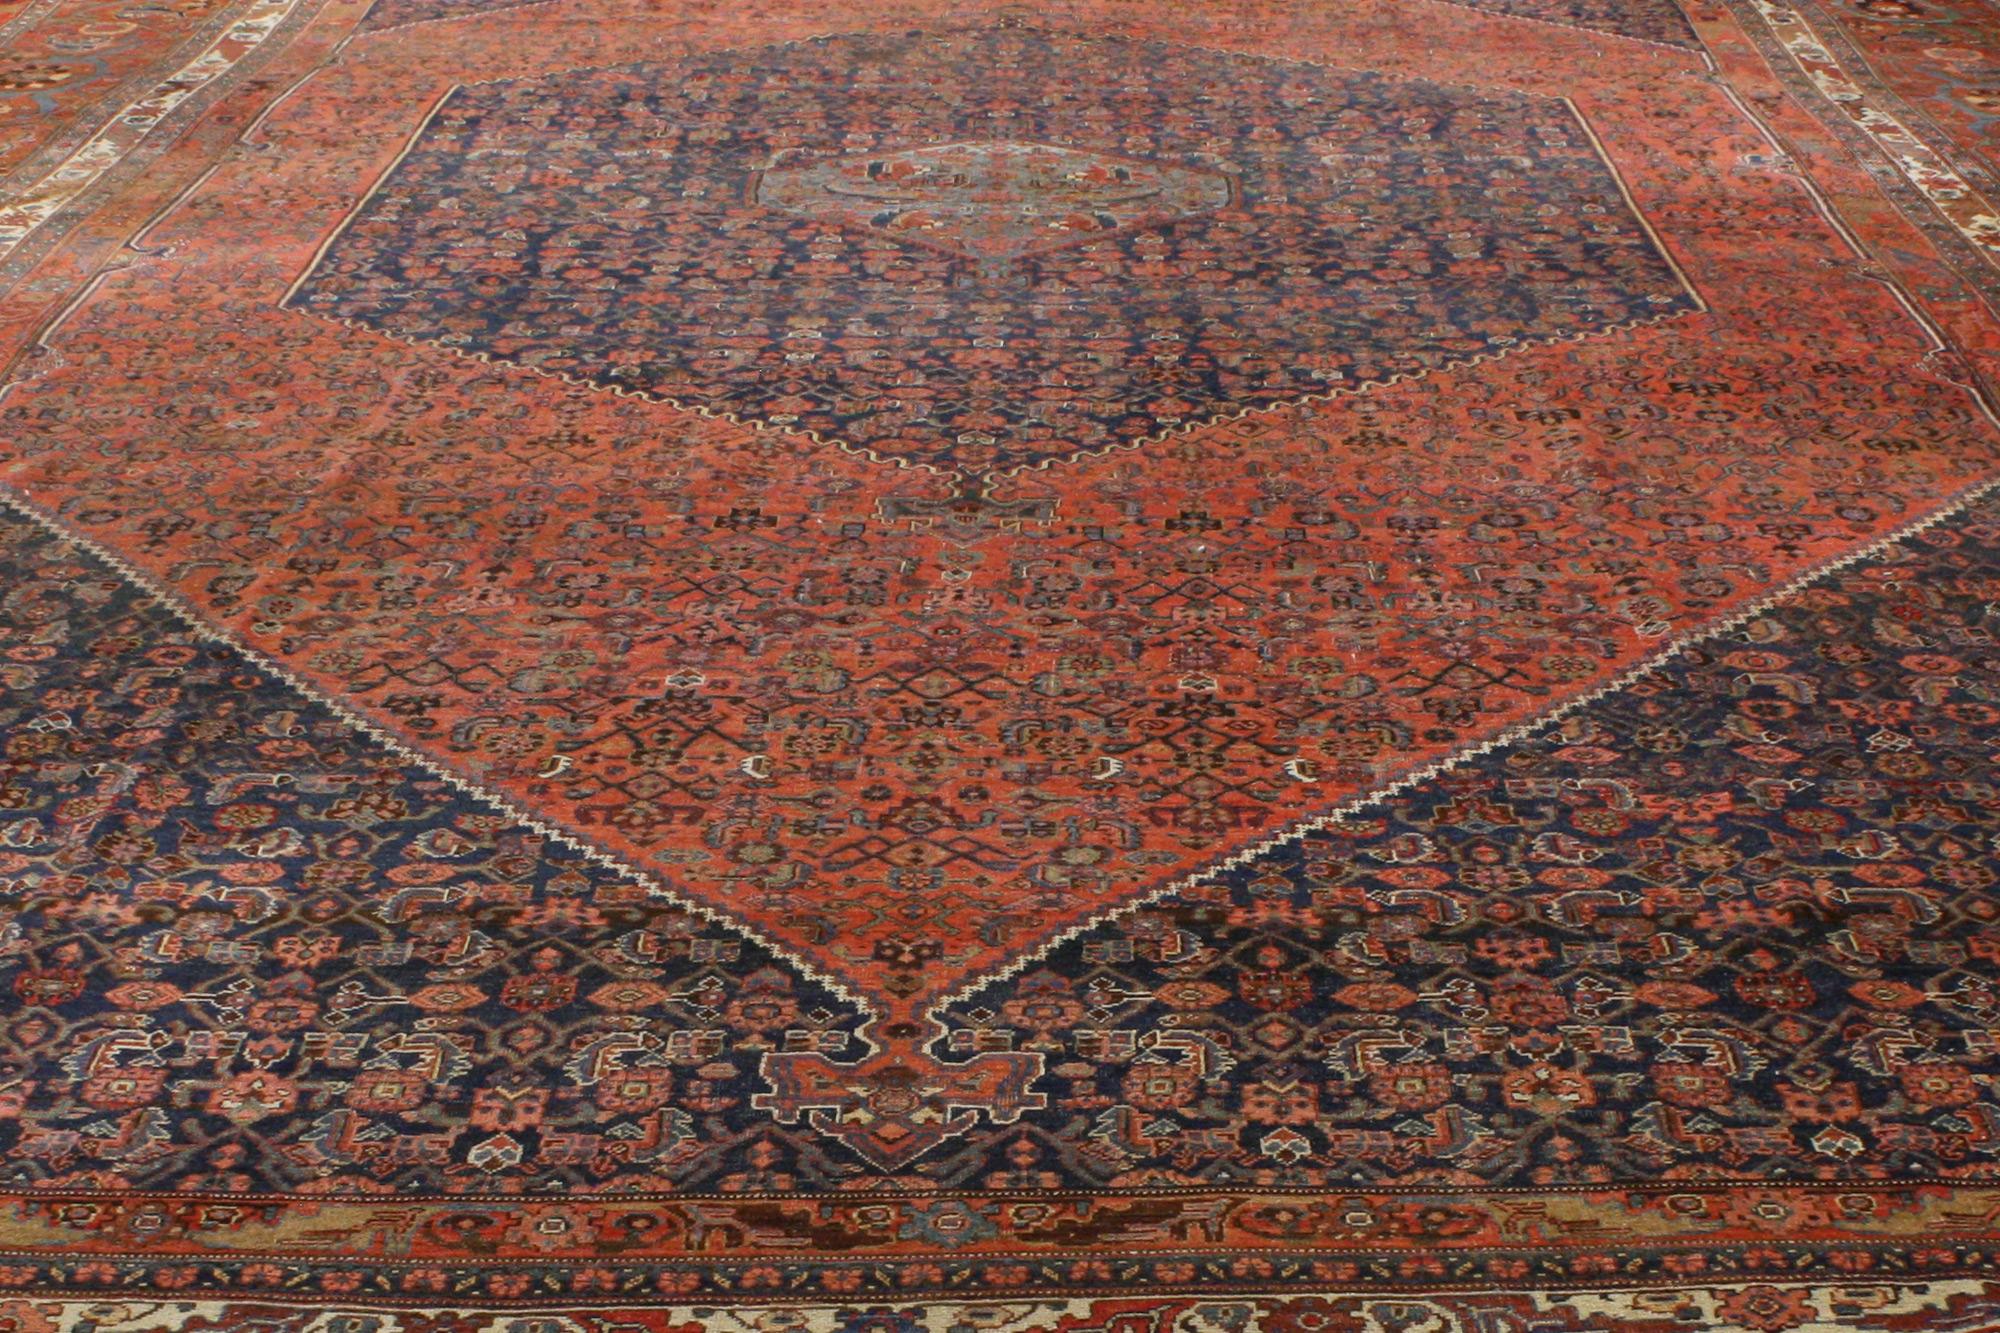 Oversized Antique Persian Bijar Rug, Hotel Lobby Size Carpet In Good Condition For Sale In Dallas, TX